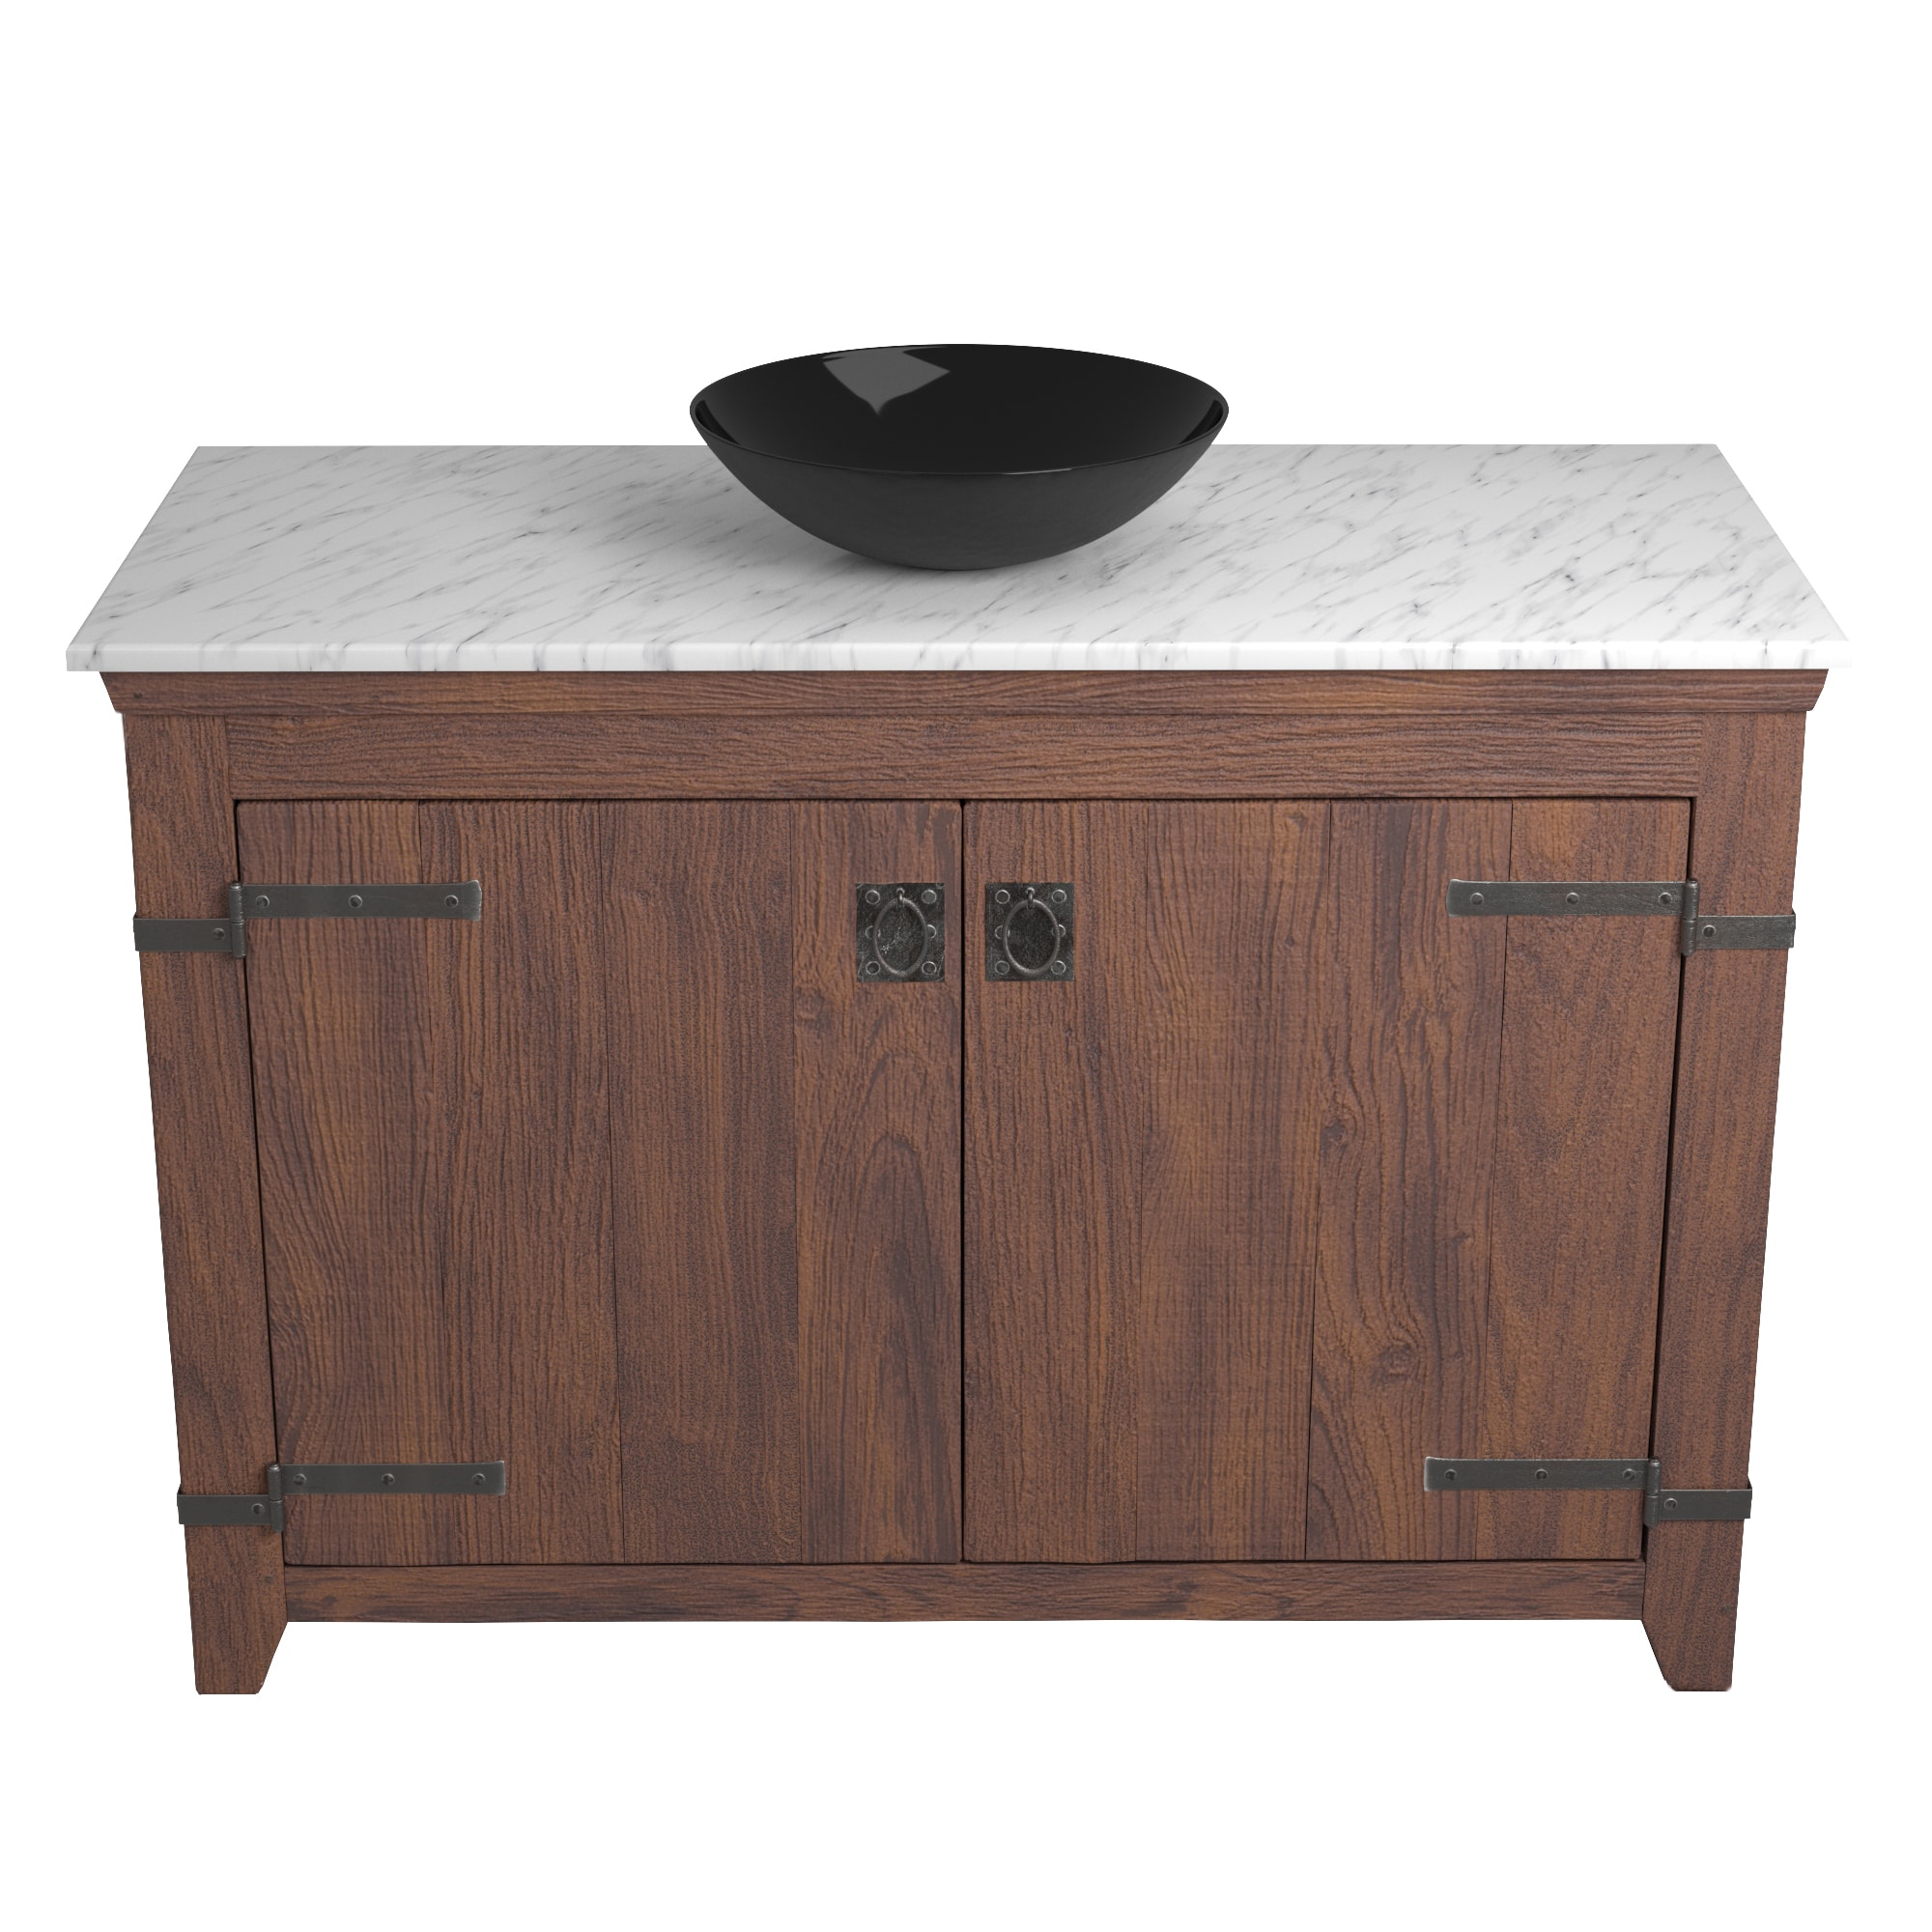 Native Trails 48" Americana Vanity in Chestnut with Carrara Marble Top and Verona in Abyss, No Faucet Hole, BND48-VB-CT-MG-068